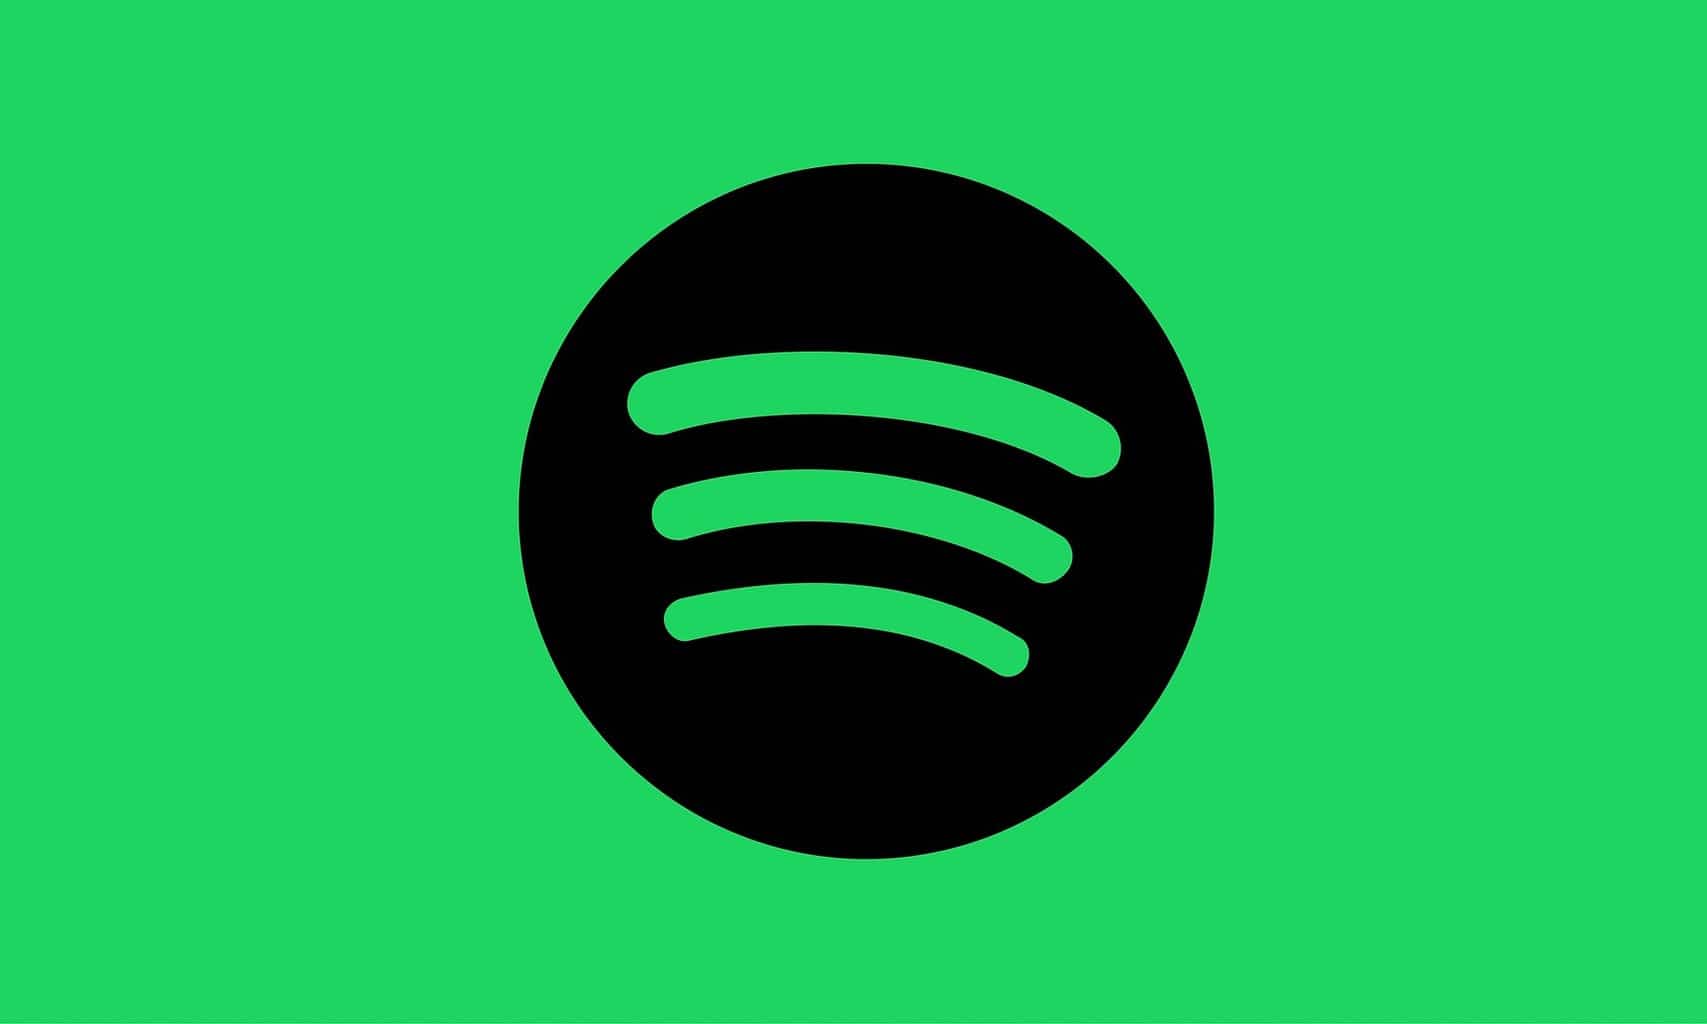 How to completely uninstall Spotify on Windows 7